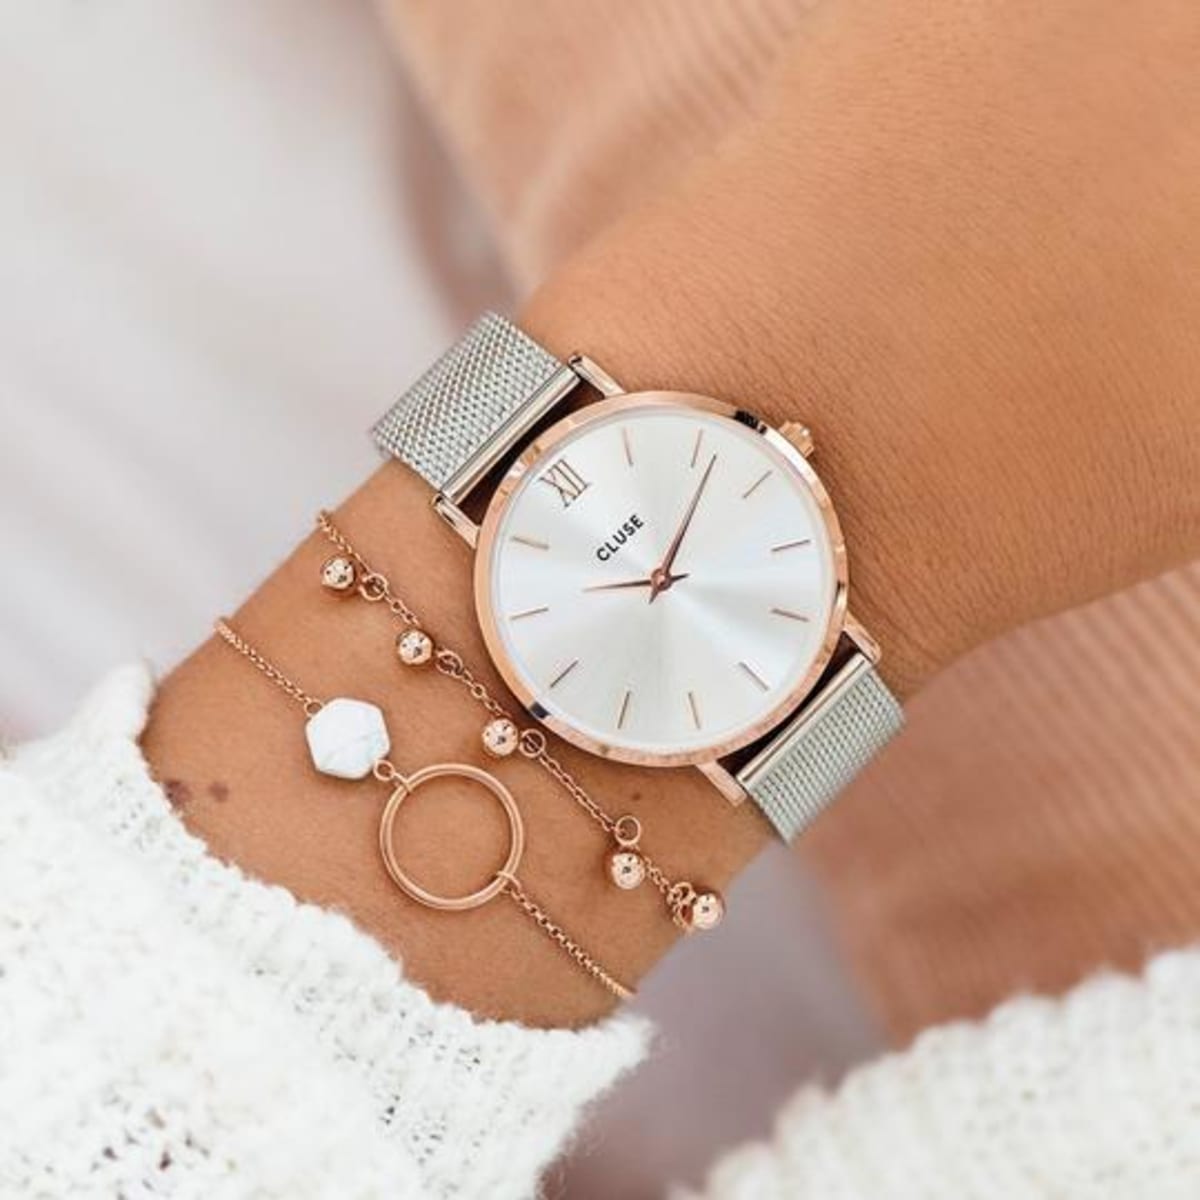 Our Minuit collection pays tribute to starry nights and elegant evening looks. The delicate design of this featherlight watch makes it the perfect accessory for a fashionable, yet subtle result. The watch features a 33 mm case, where rose gold is combined with a modern sunray dial and silver stainless steel mesh strap. The strap can be easily interchanged, allowing you to personalise your watch.